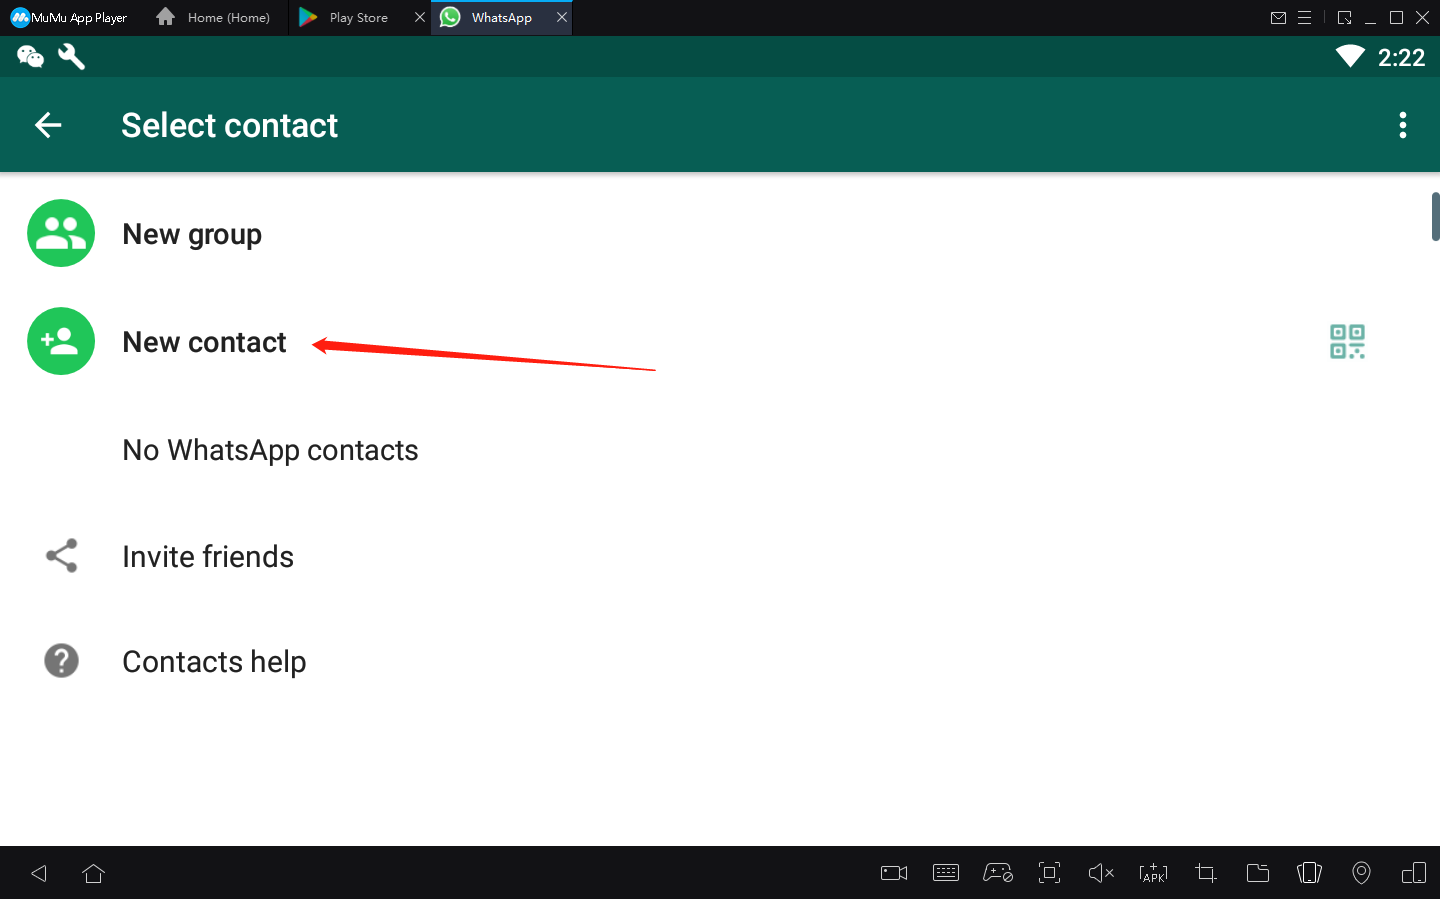 How to log in to WhatsApp with MuMu Player on PC8